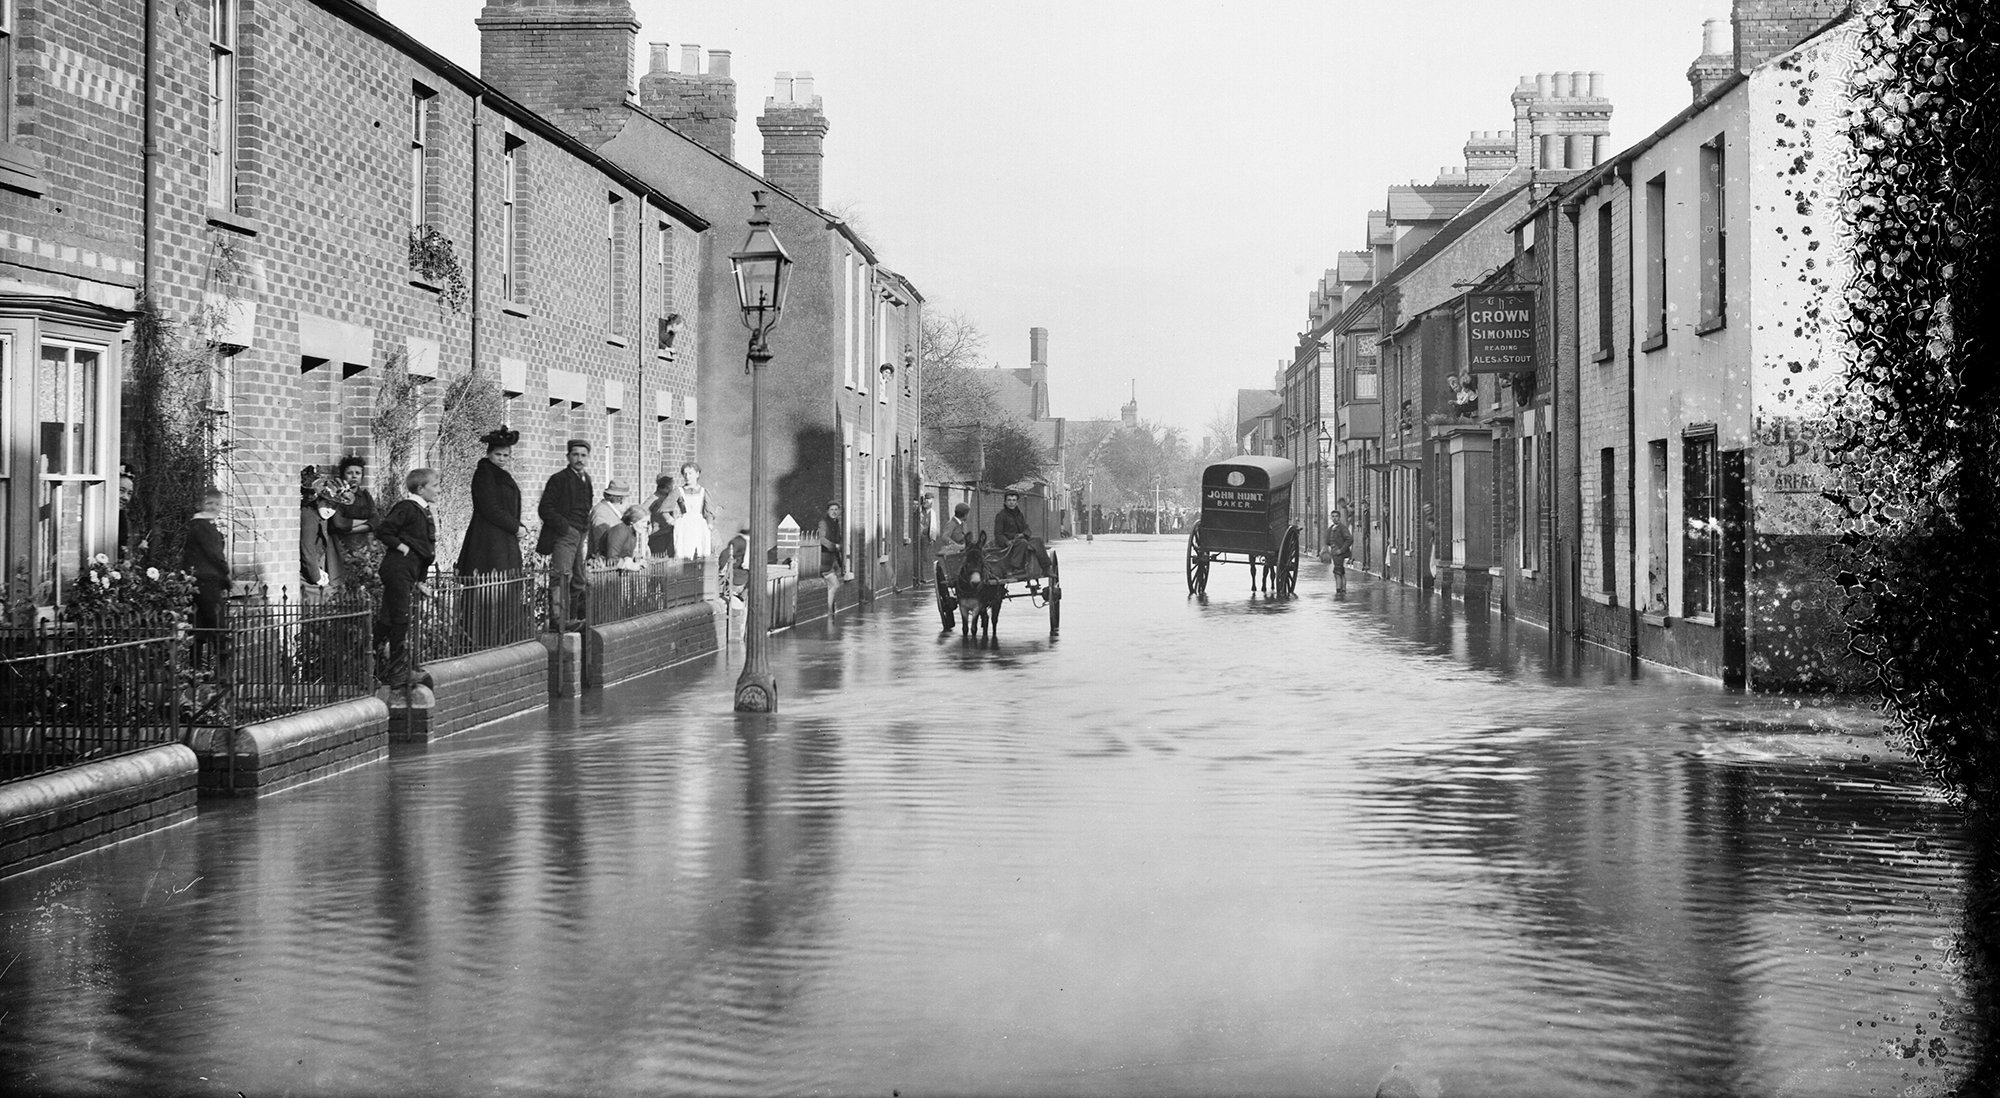 Henry Taunt's 1890 photo of flooding in Oxford